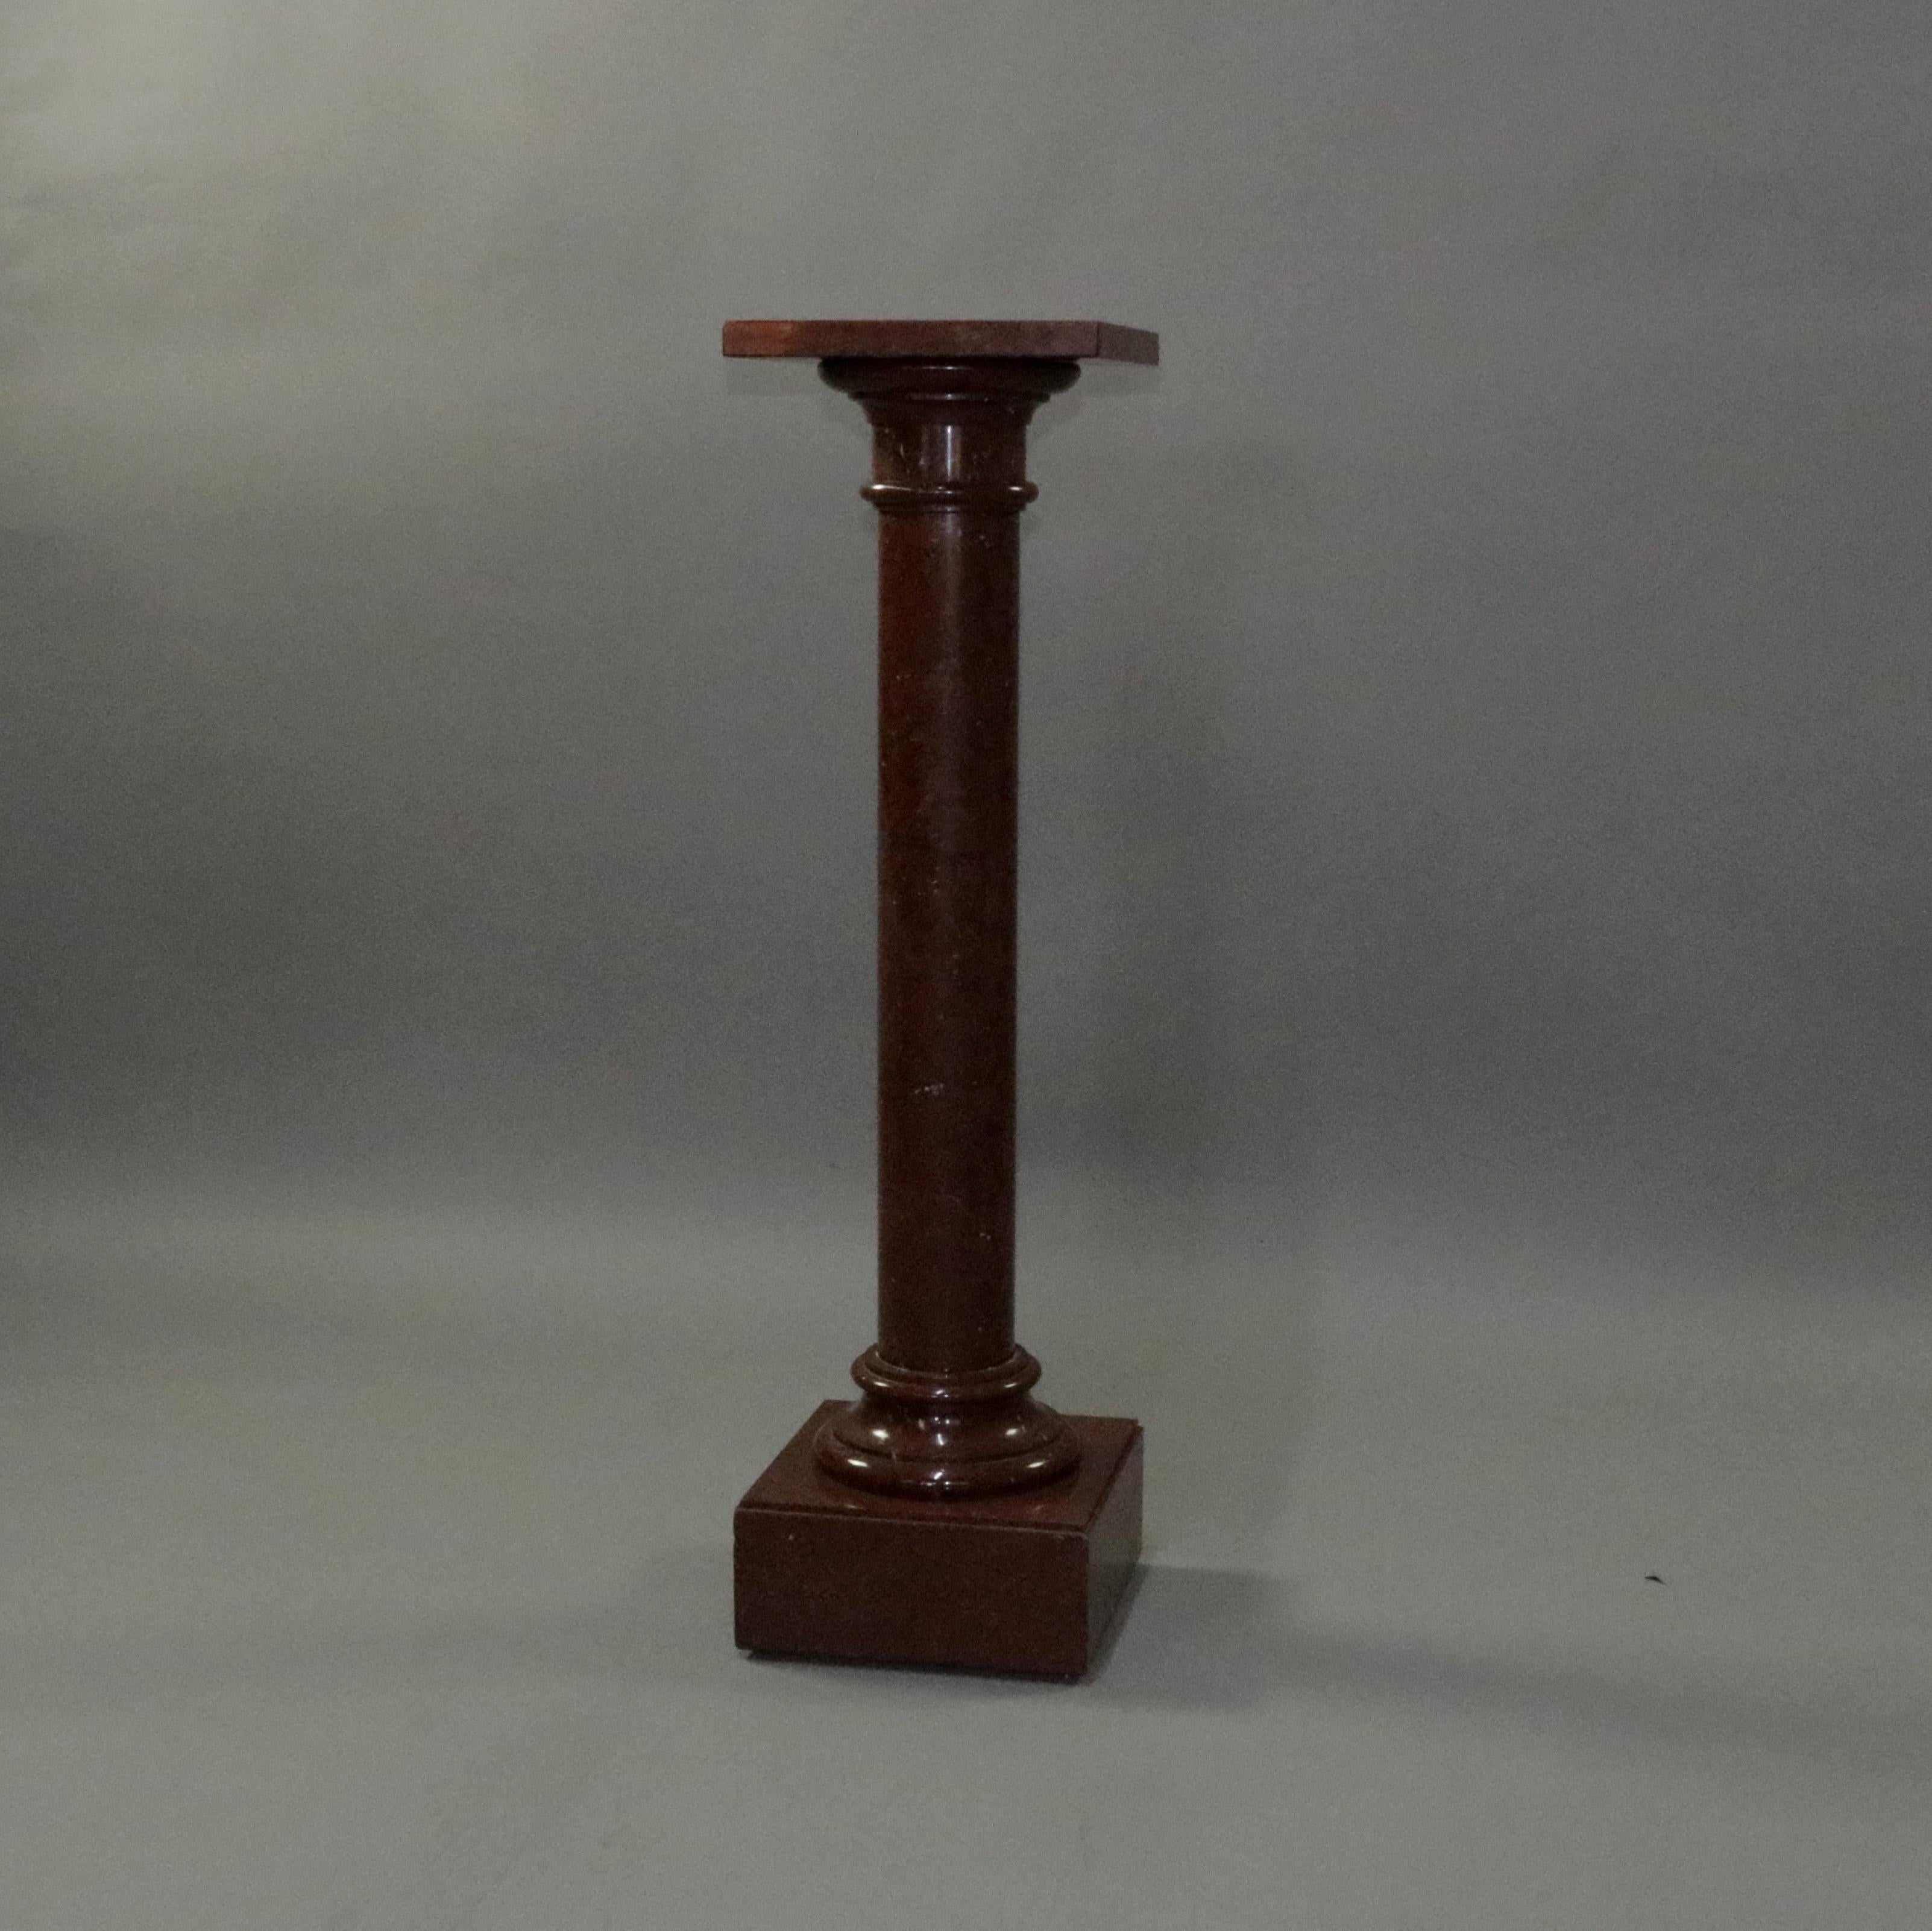 Antique French Empire rouge marble sculpture display pedestal features rouge marble construction in Corinthian column form having carved capital and stepped base, circa 1880

Measures: 44